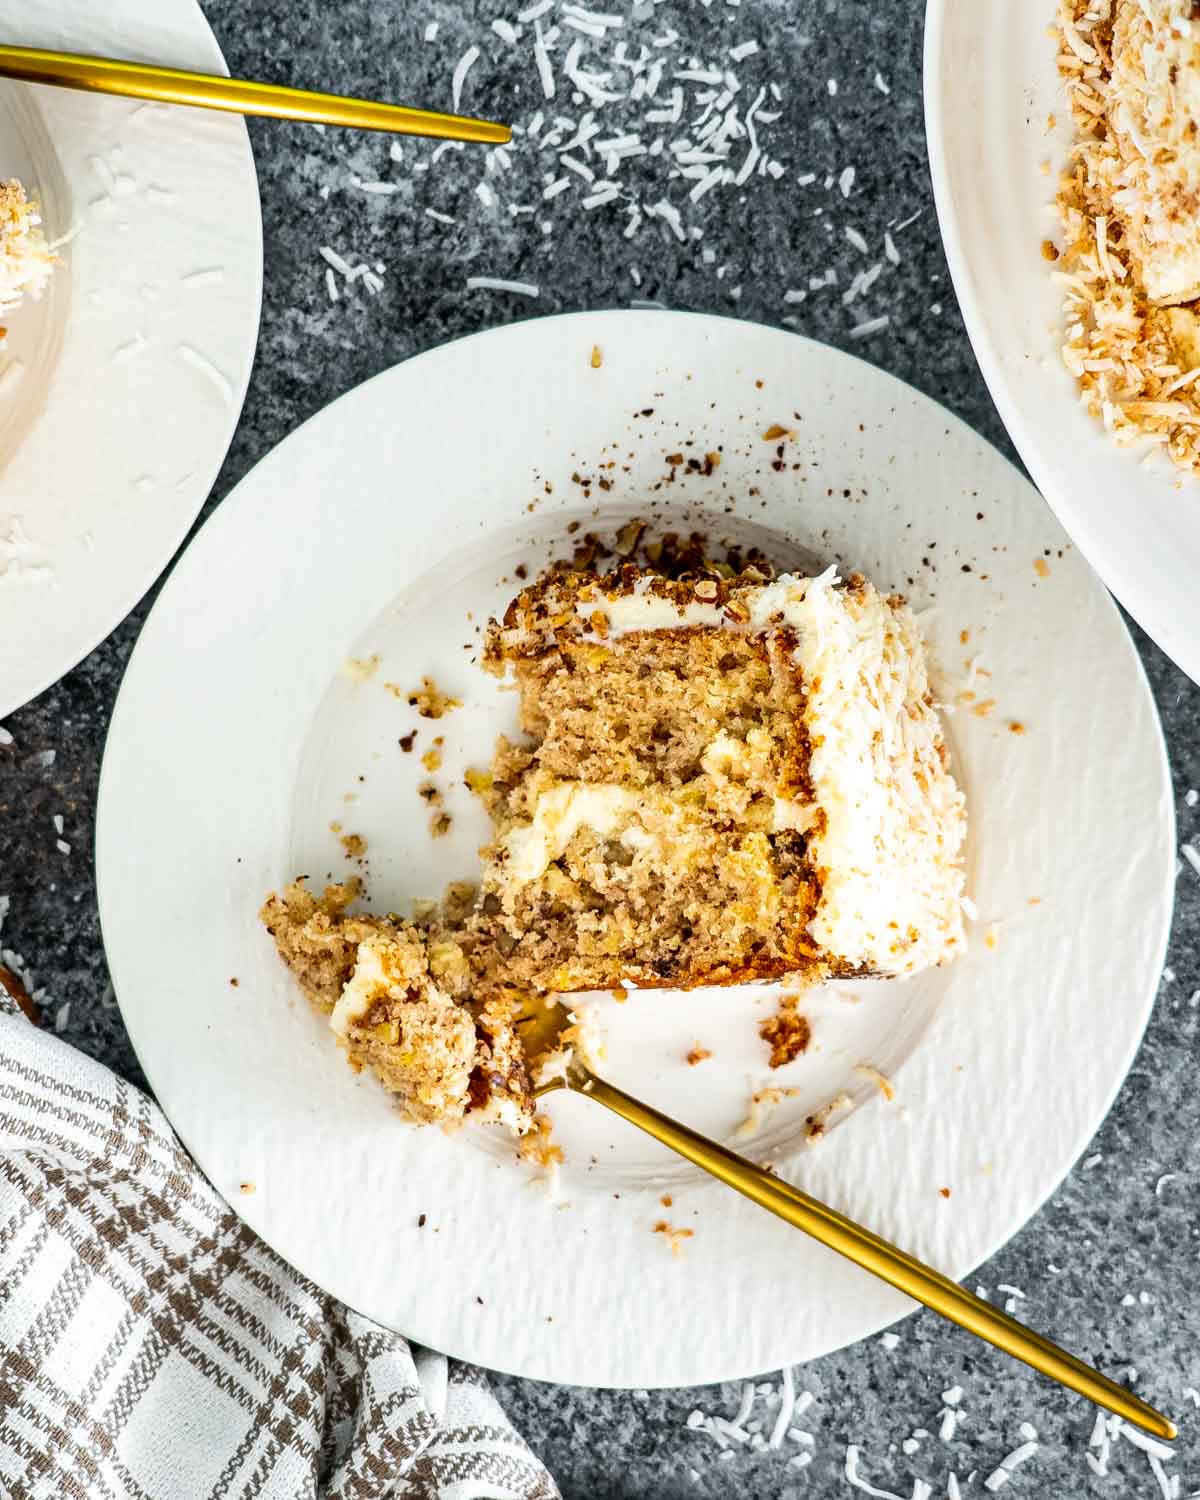 a slice of hummingbird cake on a white plate with a gold fork taking a bite out of it.